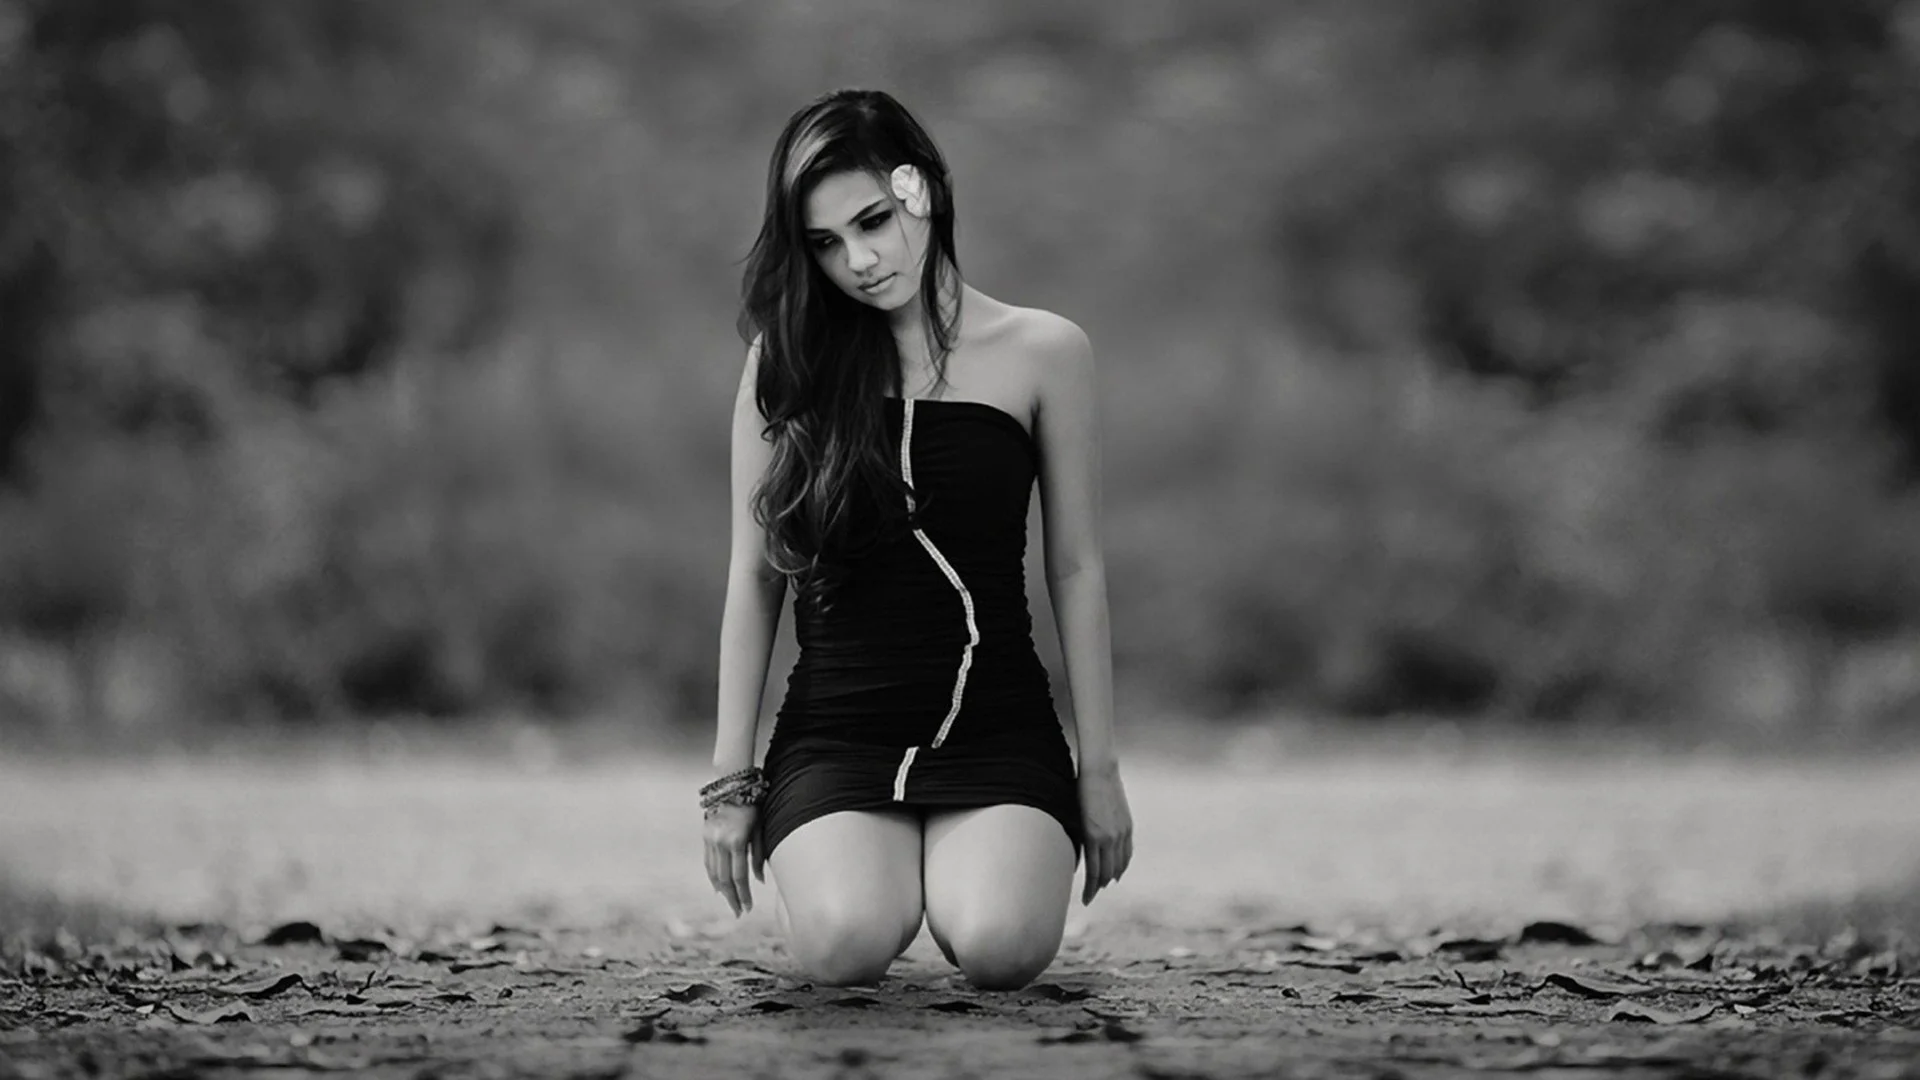 Hot Girl Black and White – Wallpapers PC Free Download